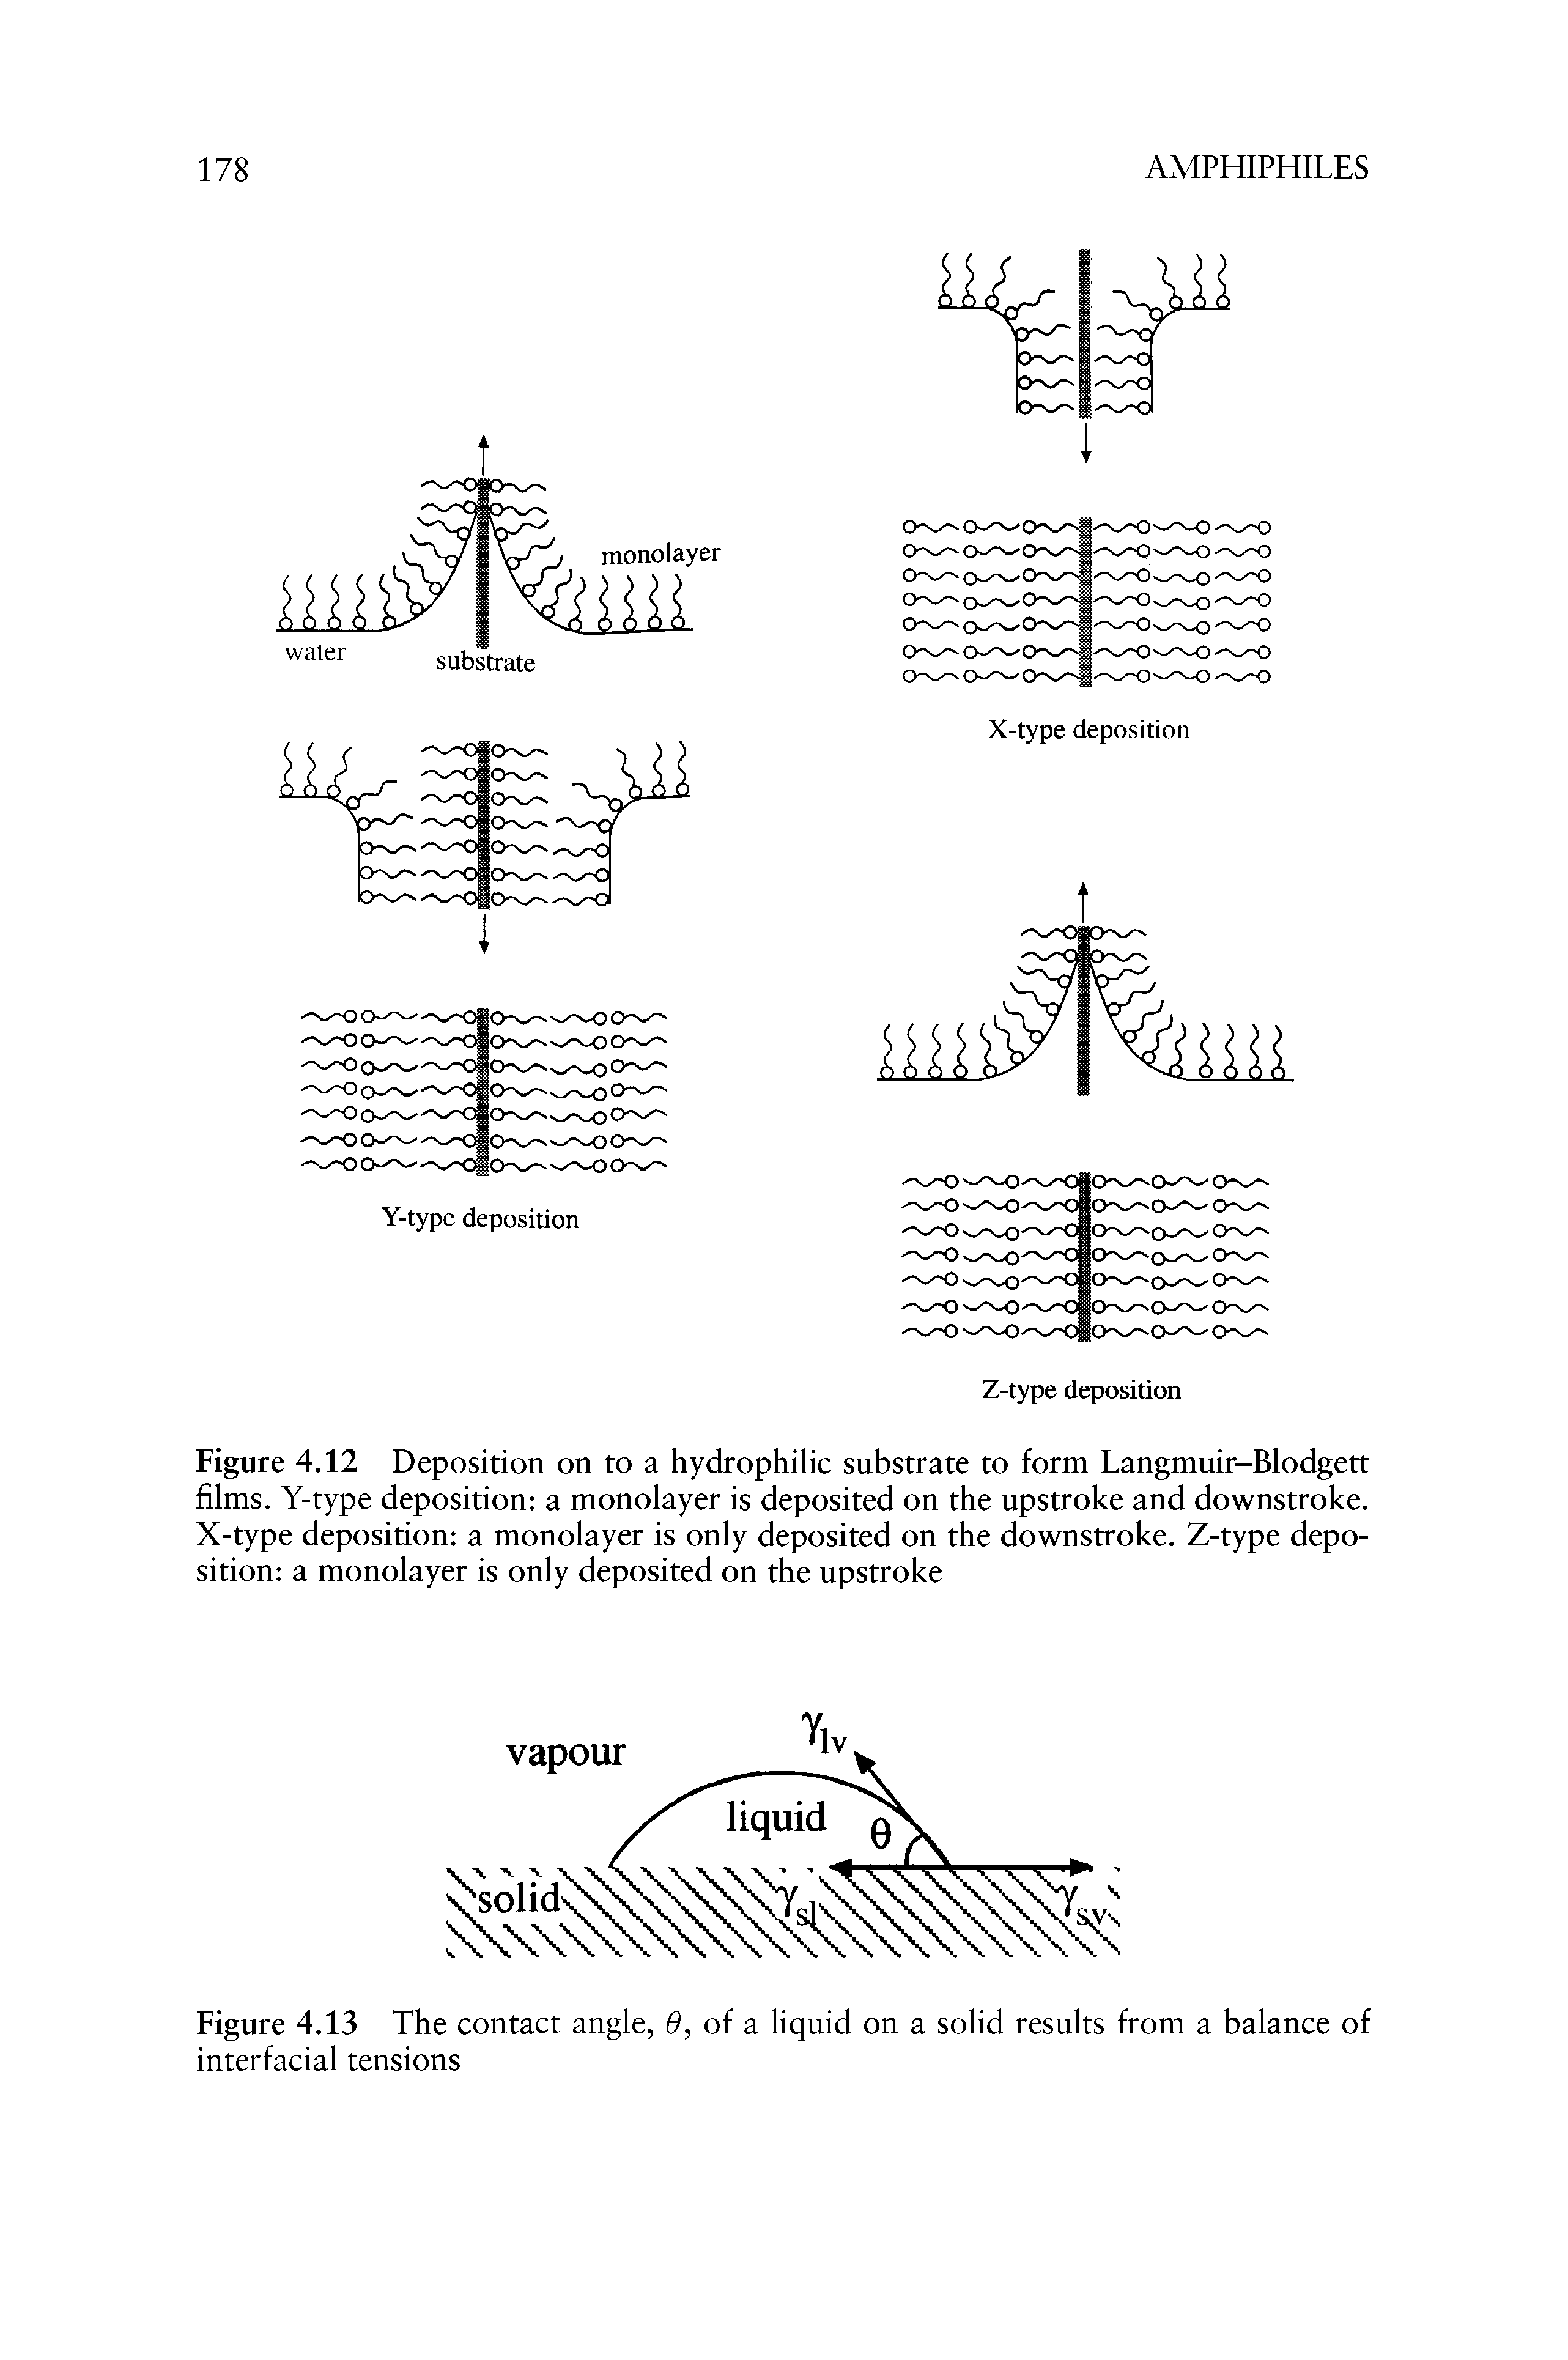 Figure 4.12 Deposition on to a hydrophilic substrate to form Langmuir-Blodgett films. Y-type deposition a monolayer is deposited on the upstroke and downstroke. X-type deposition a monolayer is only deposited on the downstroke. Z-type deposition a monolayer is only deposited on the upstroke...